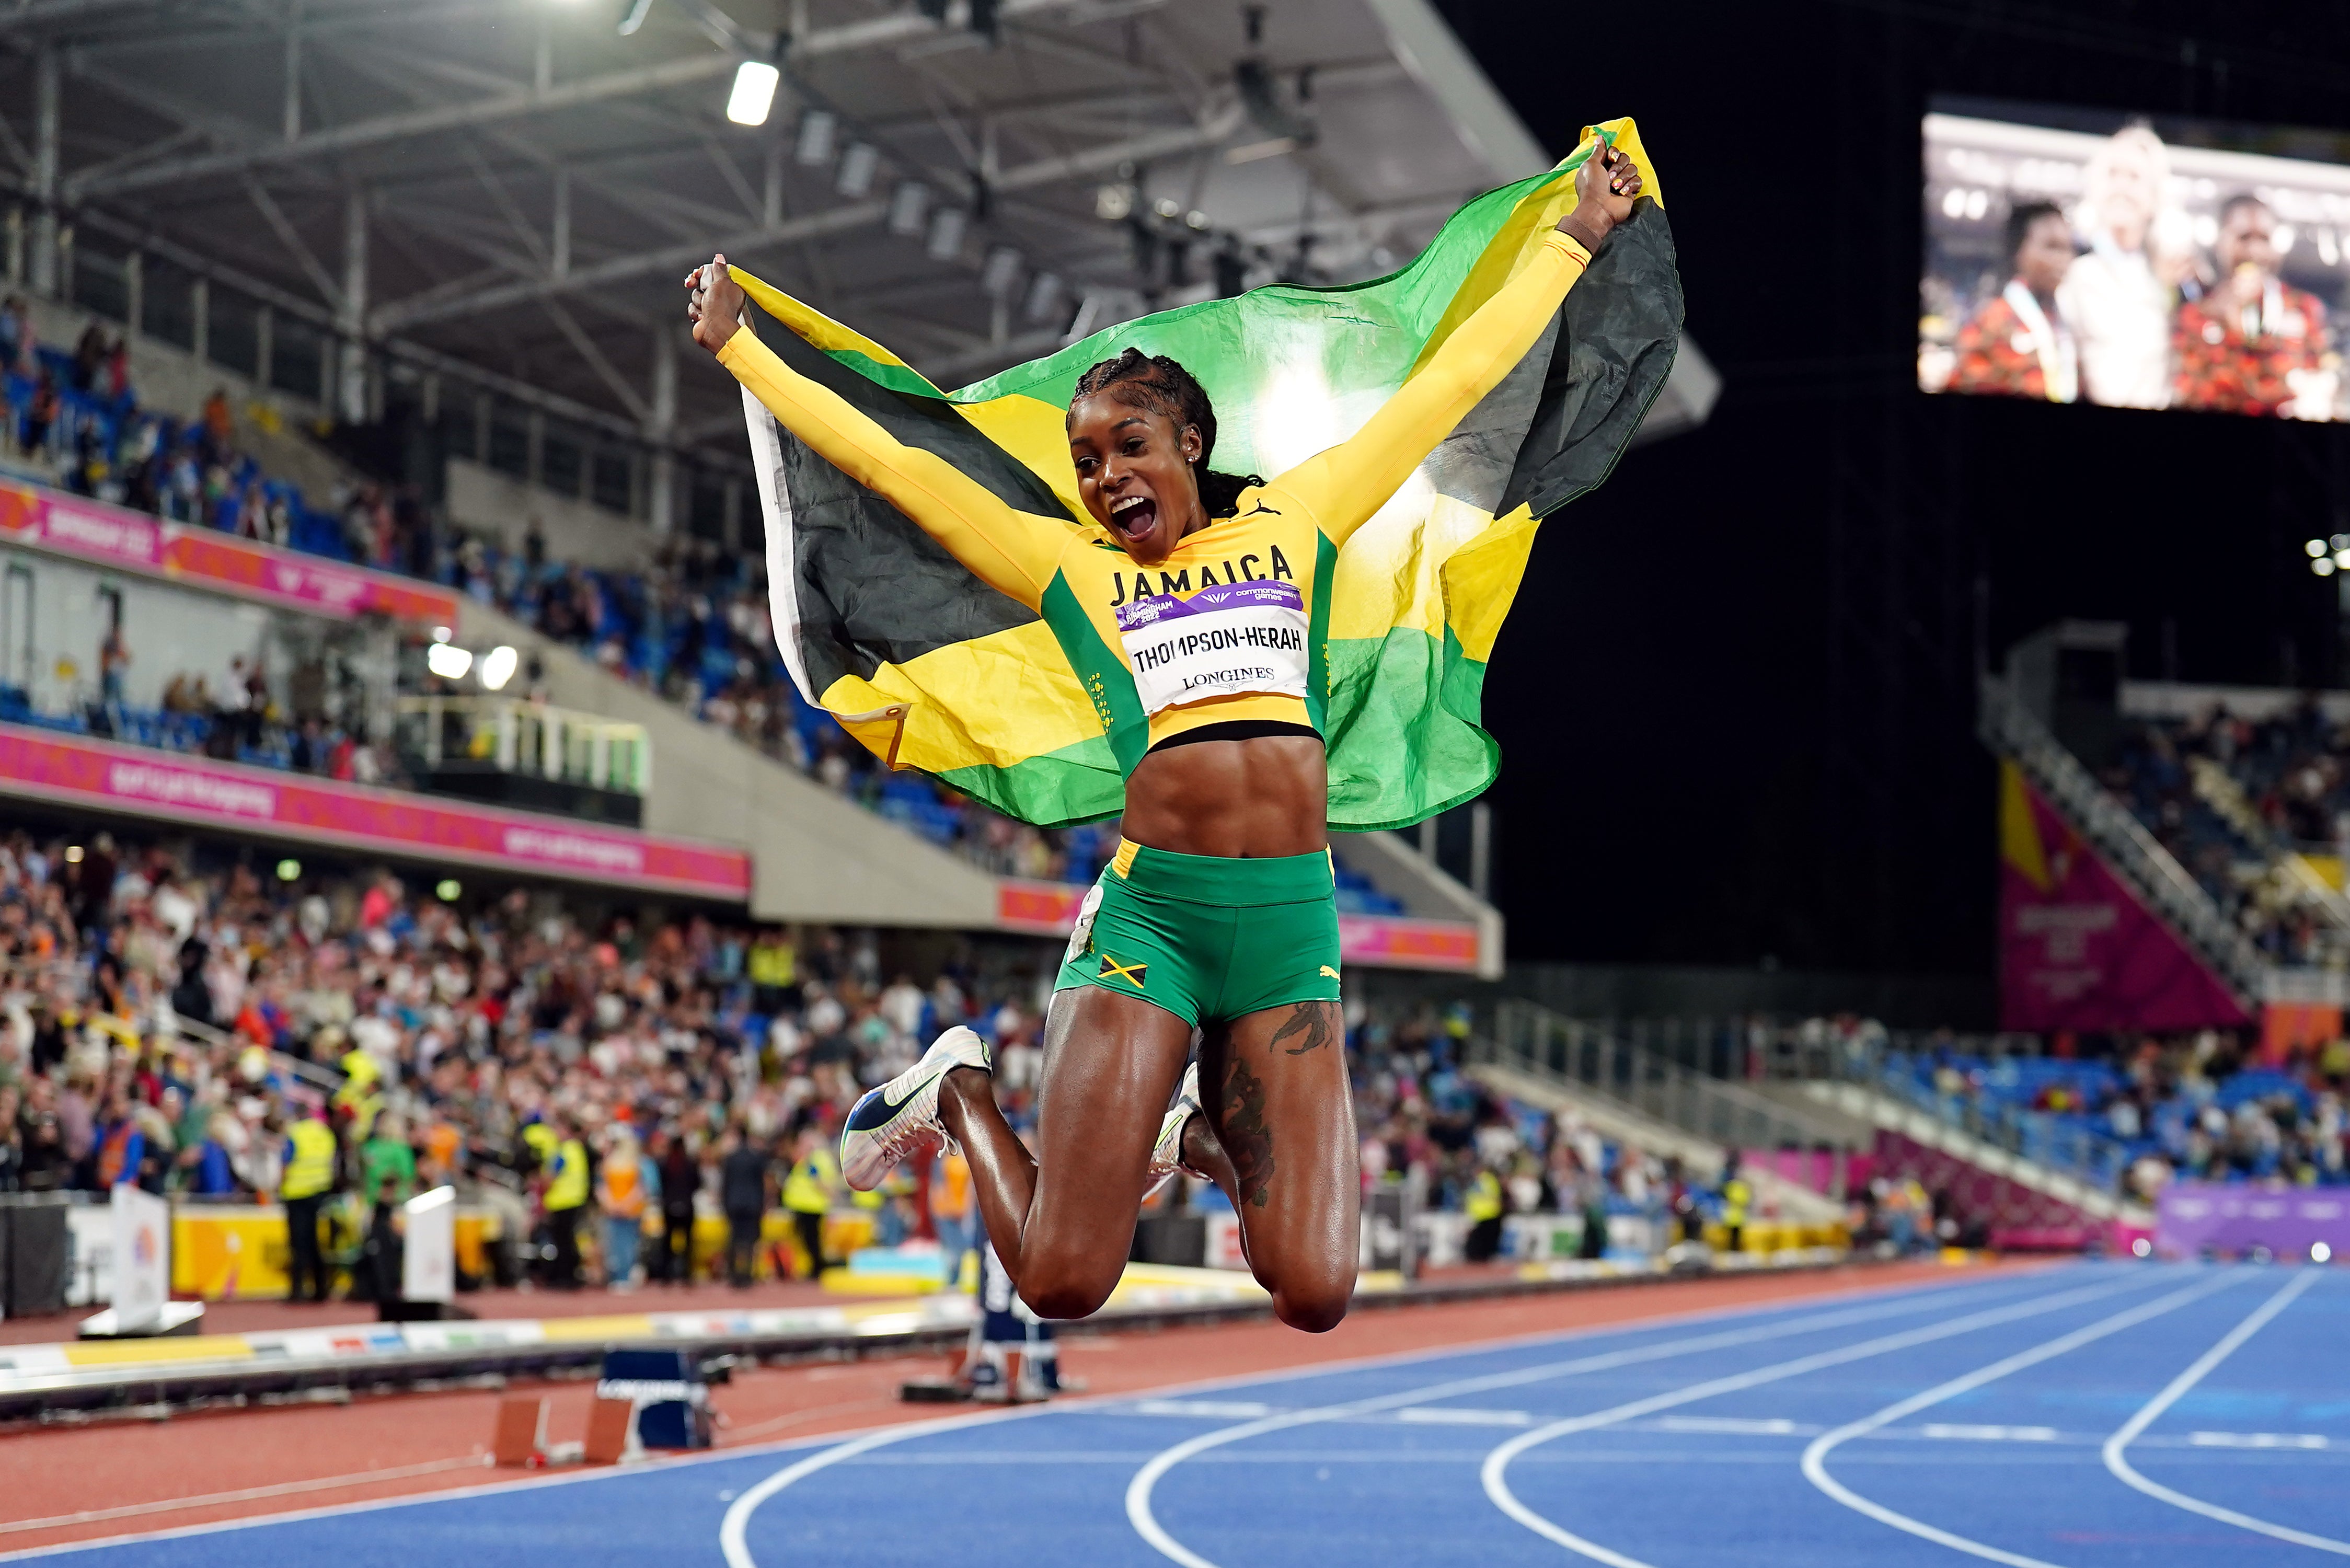 Elaine Thompson-Herah 100m and 200m gold at both Rio 2016 and Tokyo 2020